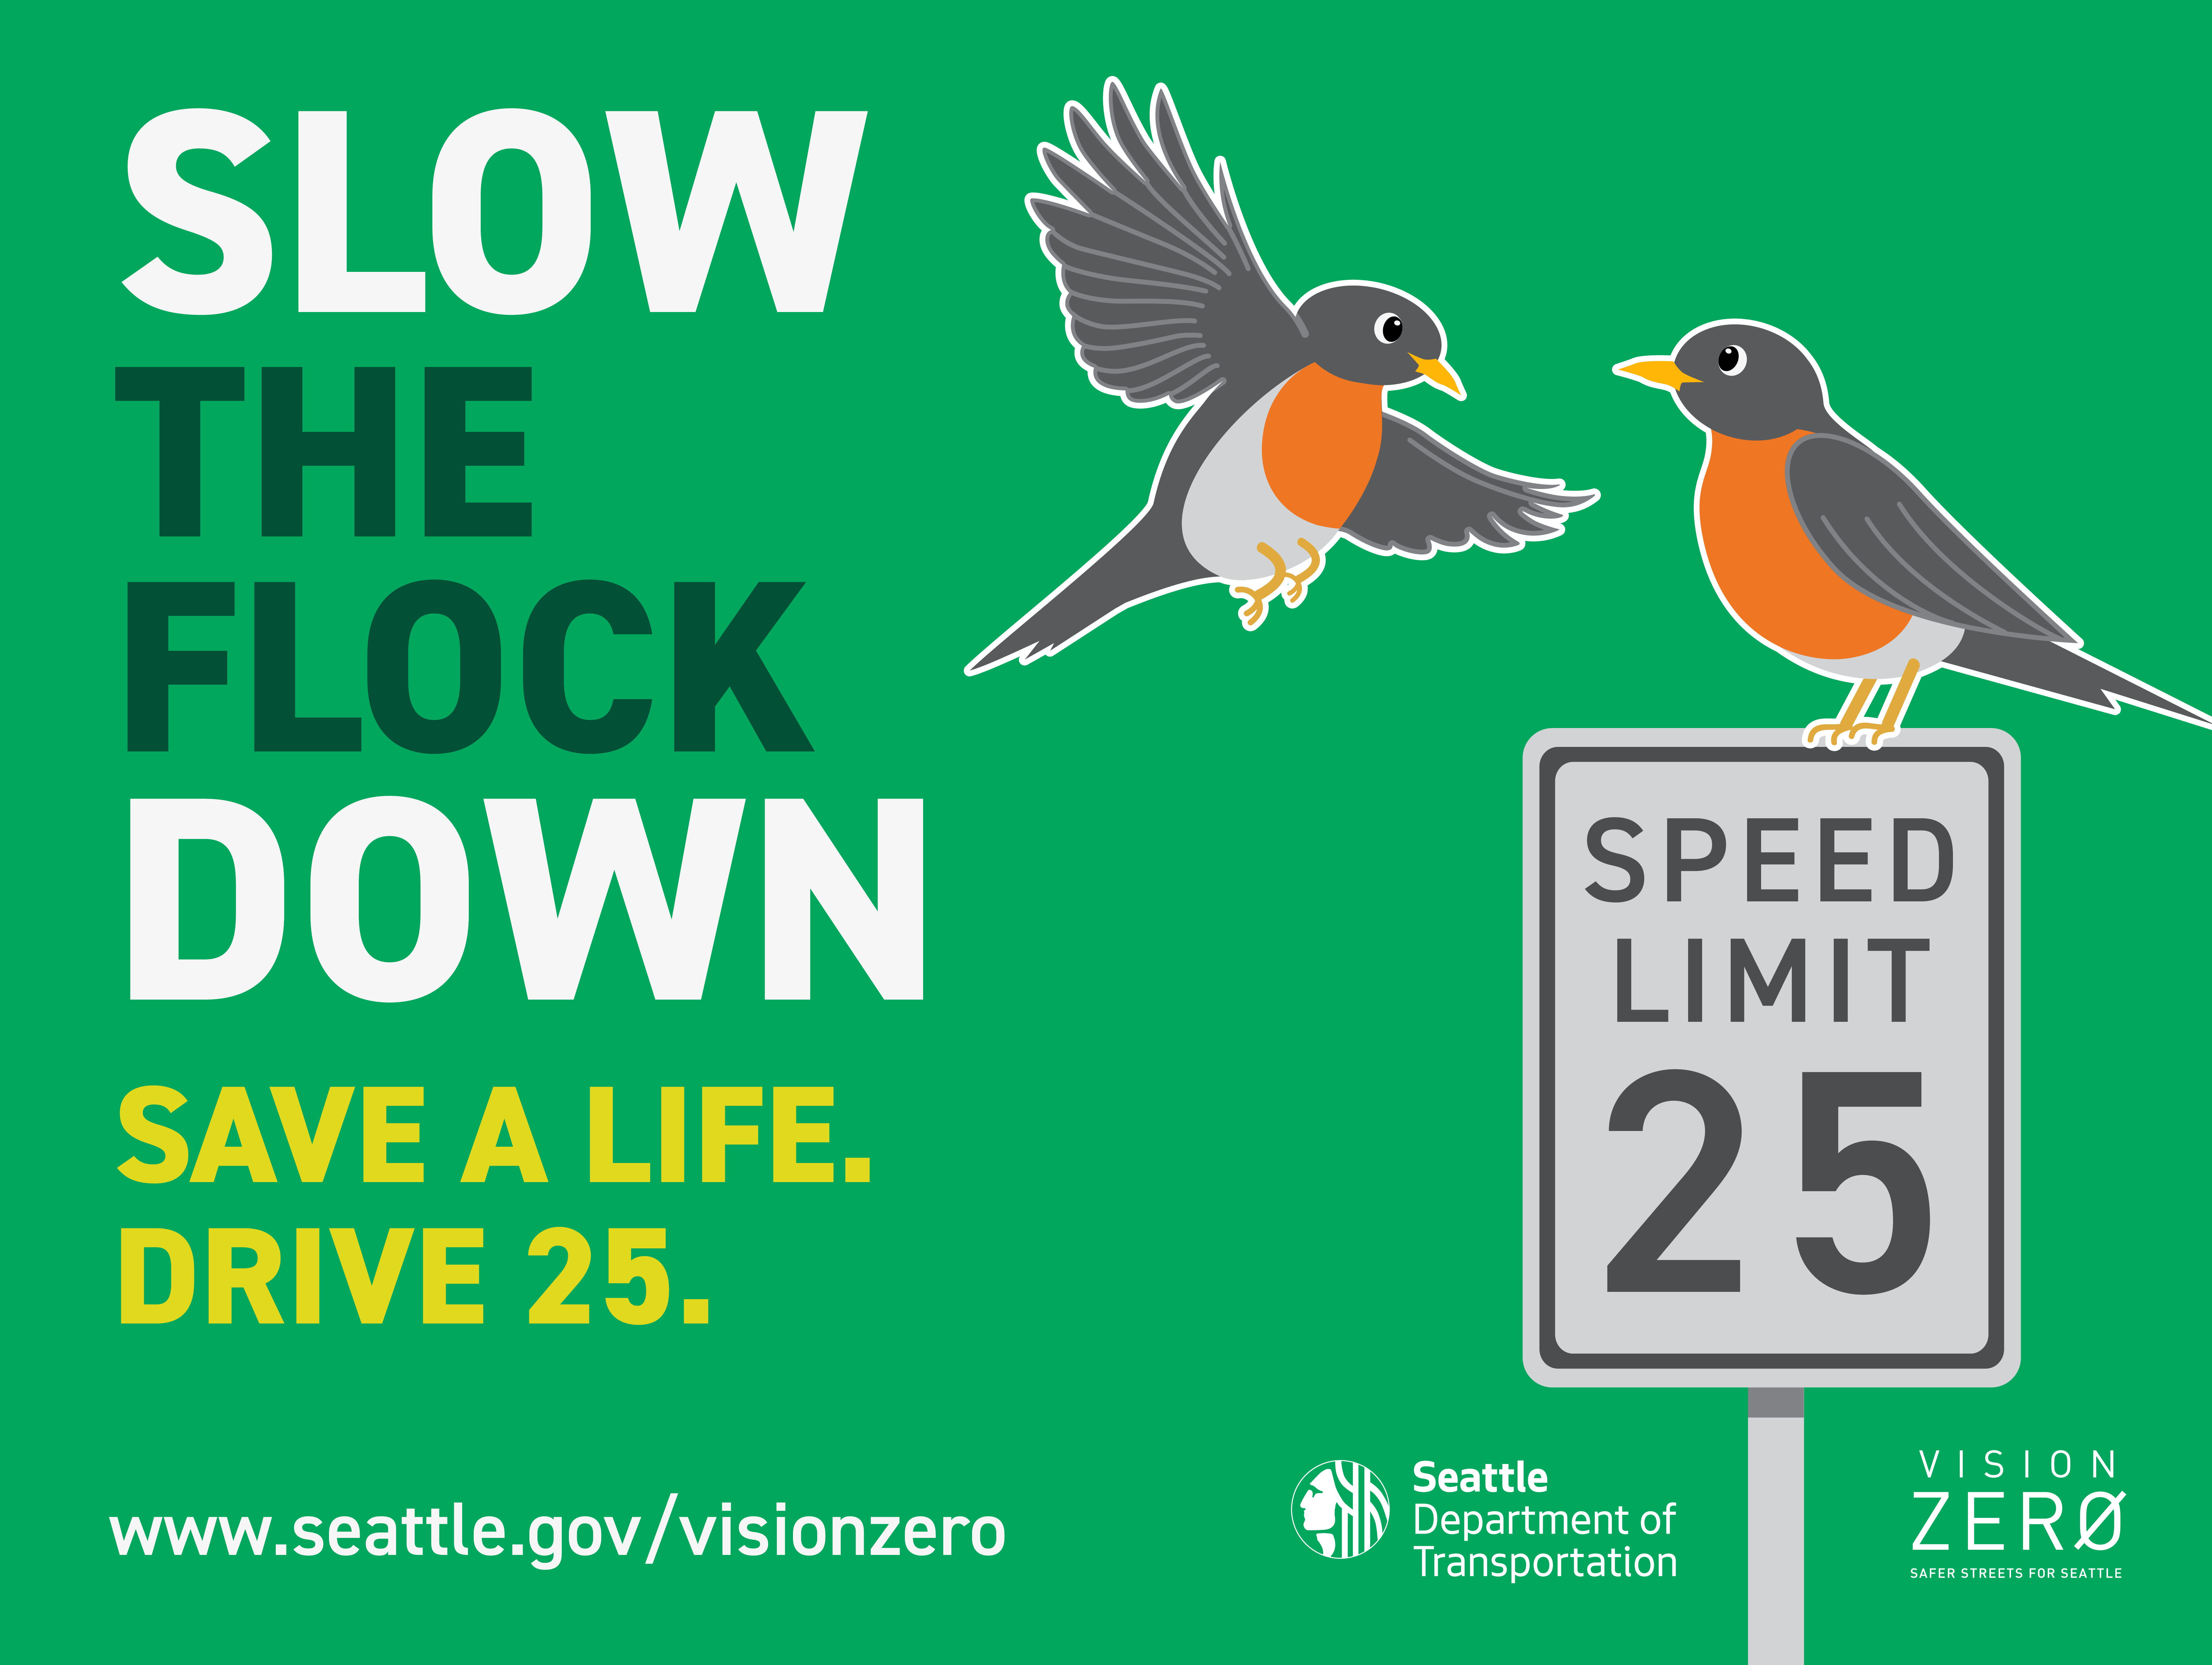  A green sign with grey and orange birds that reads: Slow the Flock Down. Save a life. Drive 25.